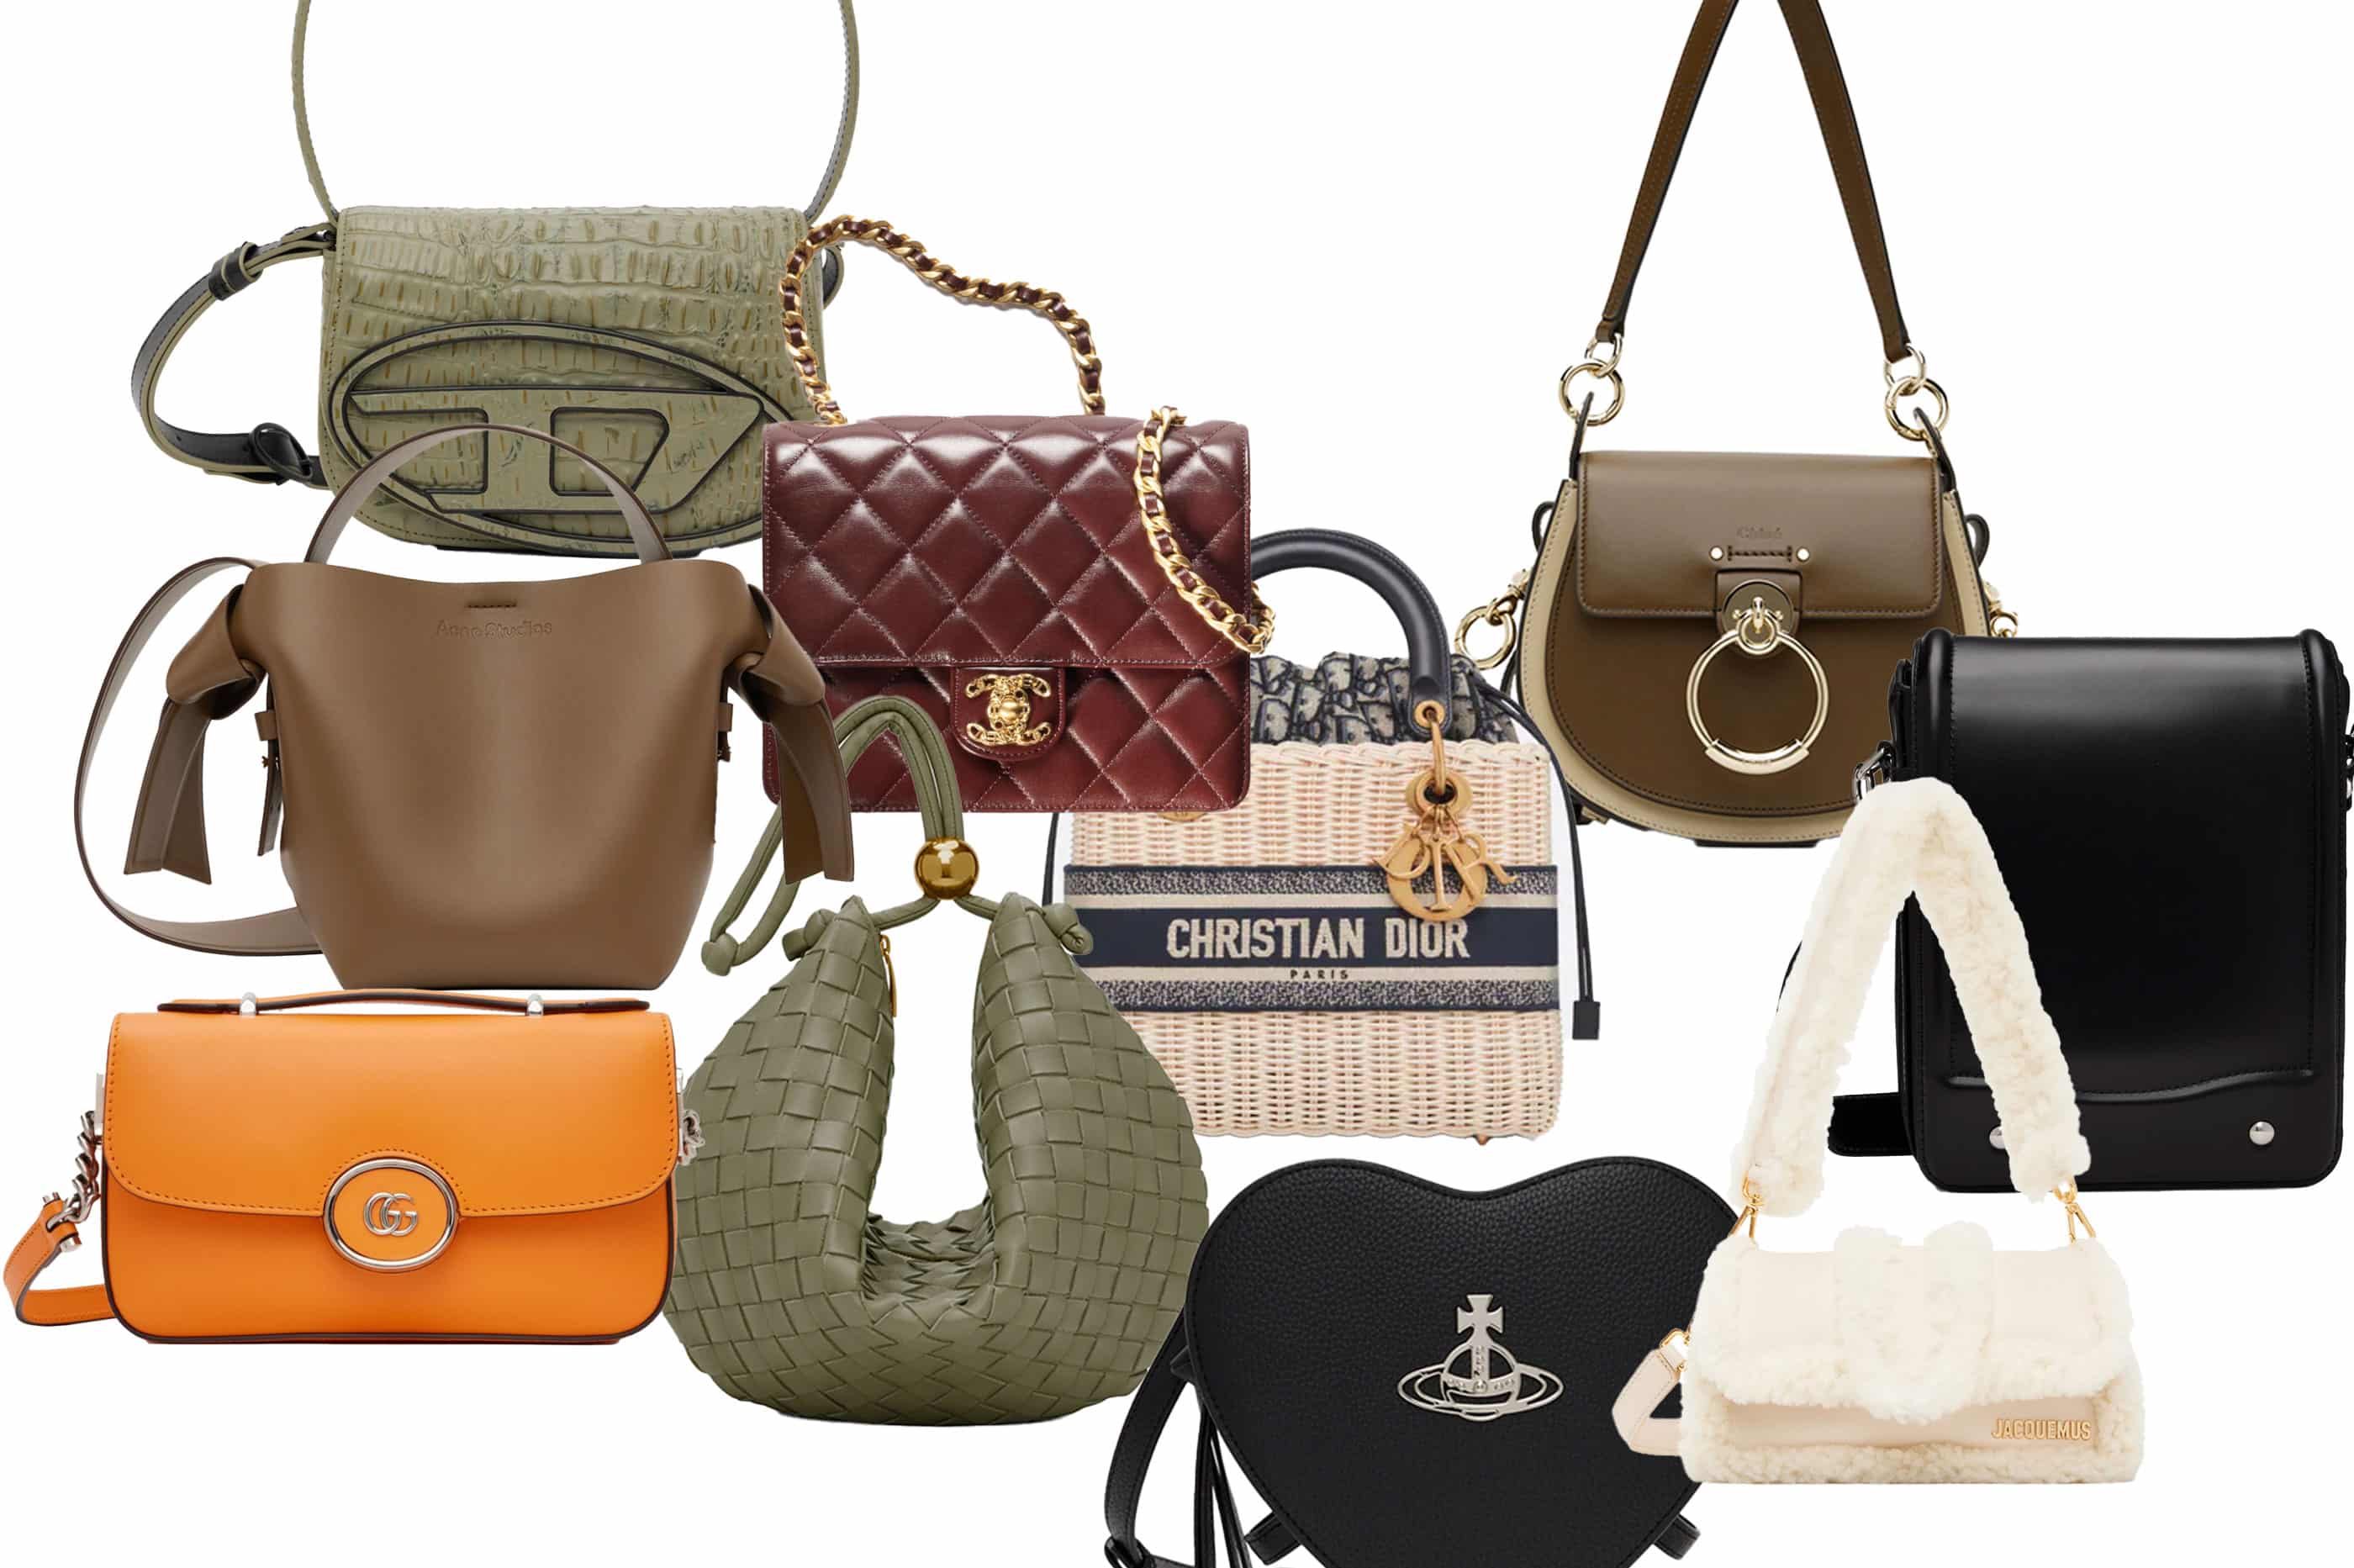 Where to buy new and vintage designer bags